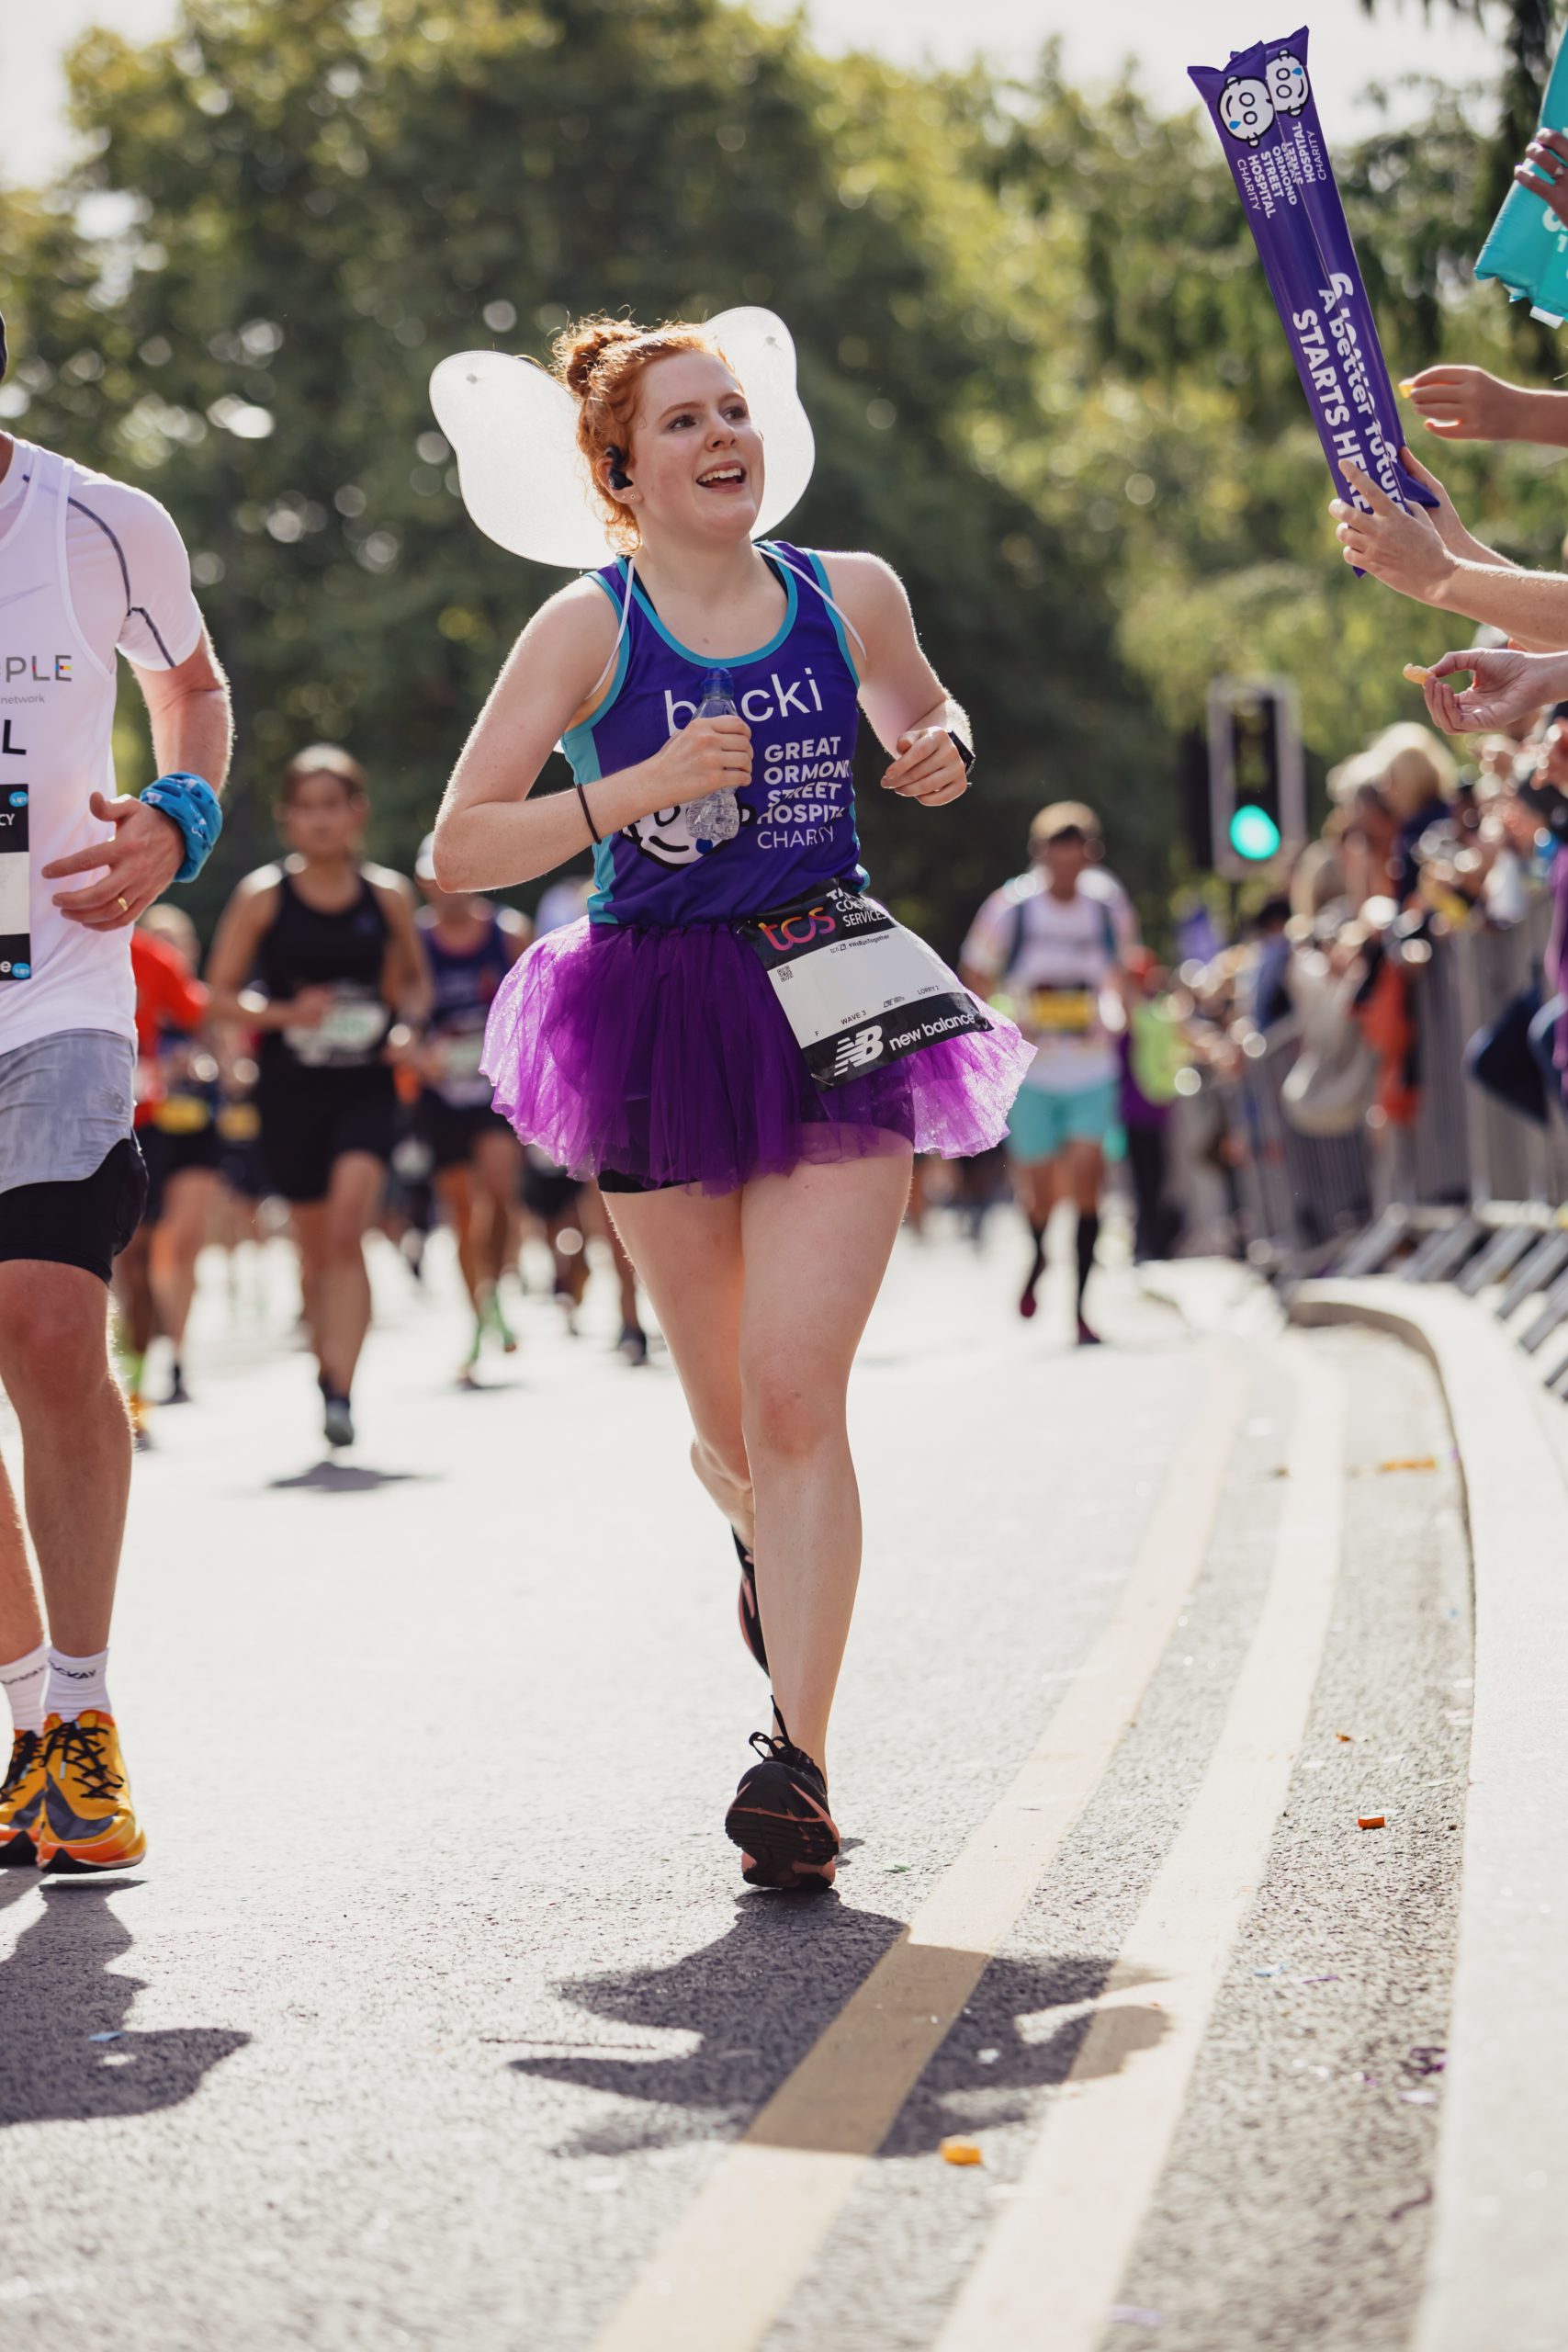 A photo of a GOSH Charity runner dressed in fancy dress